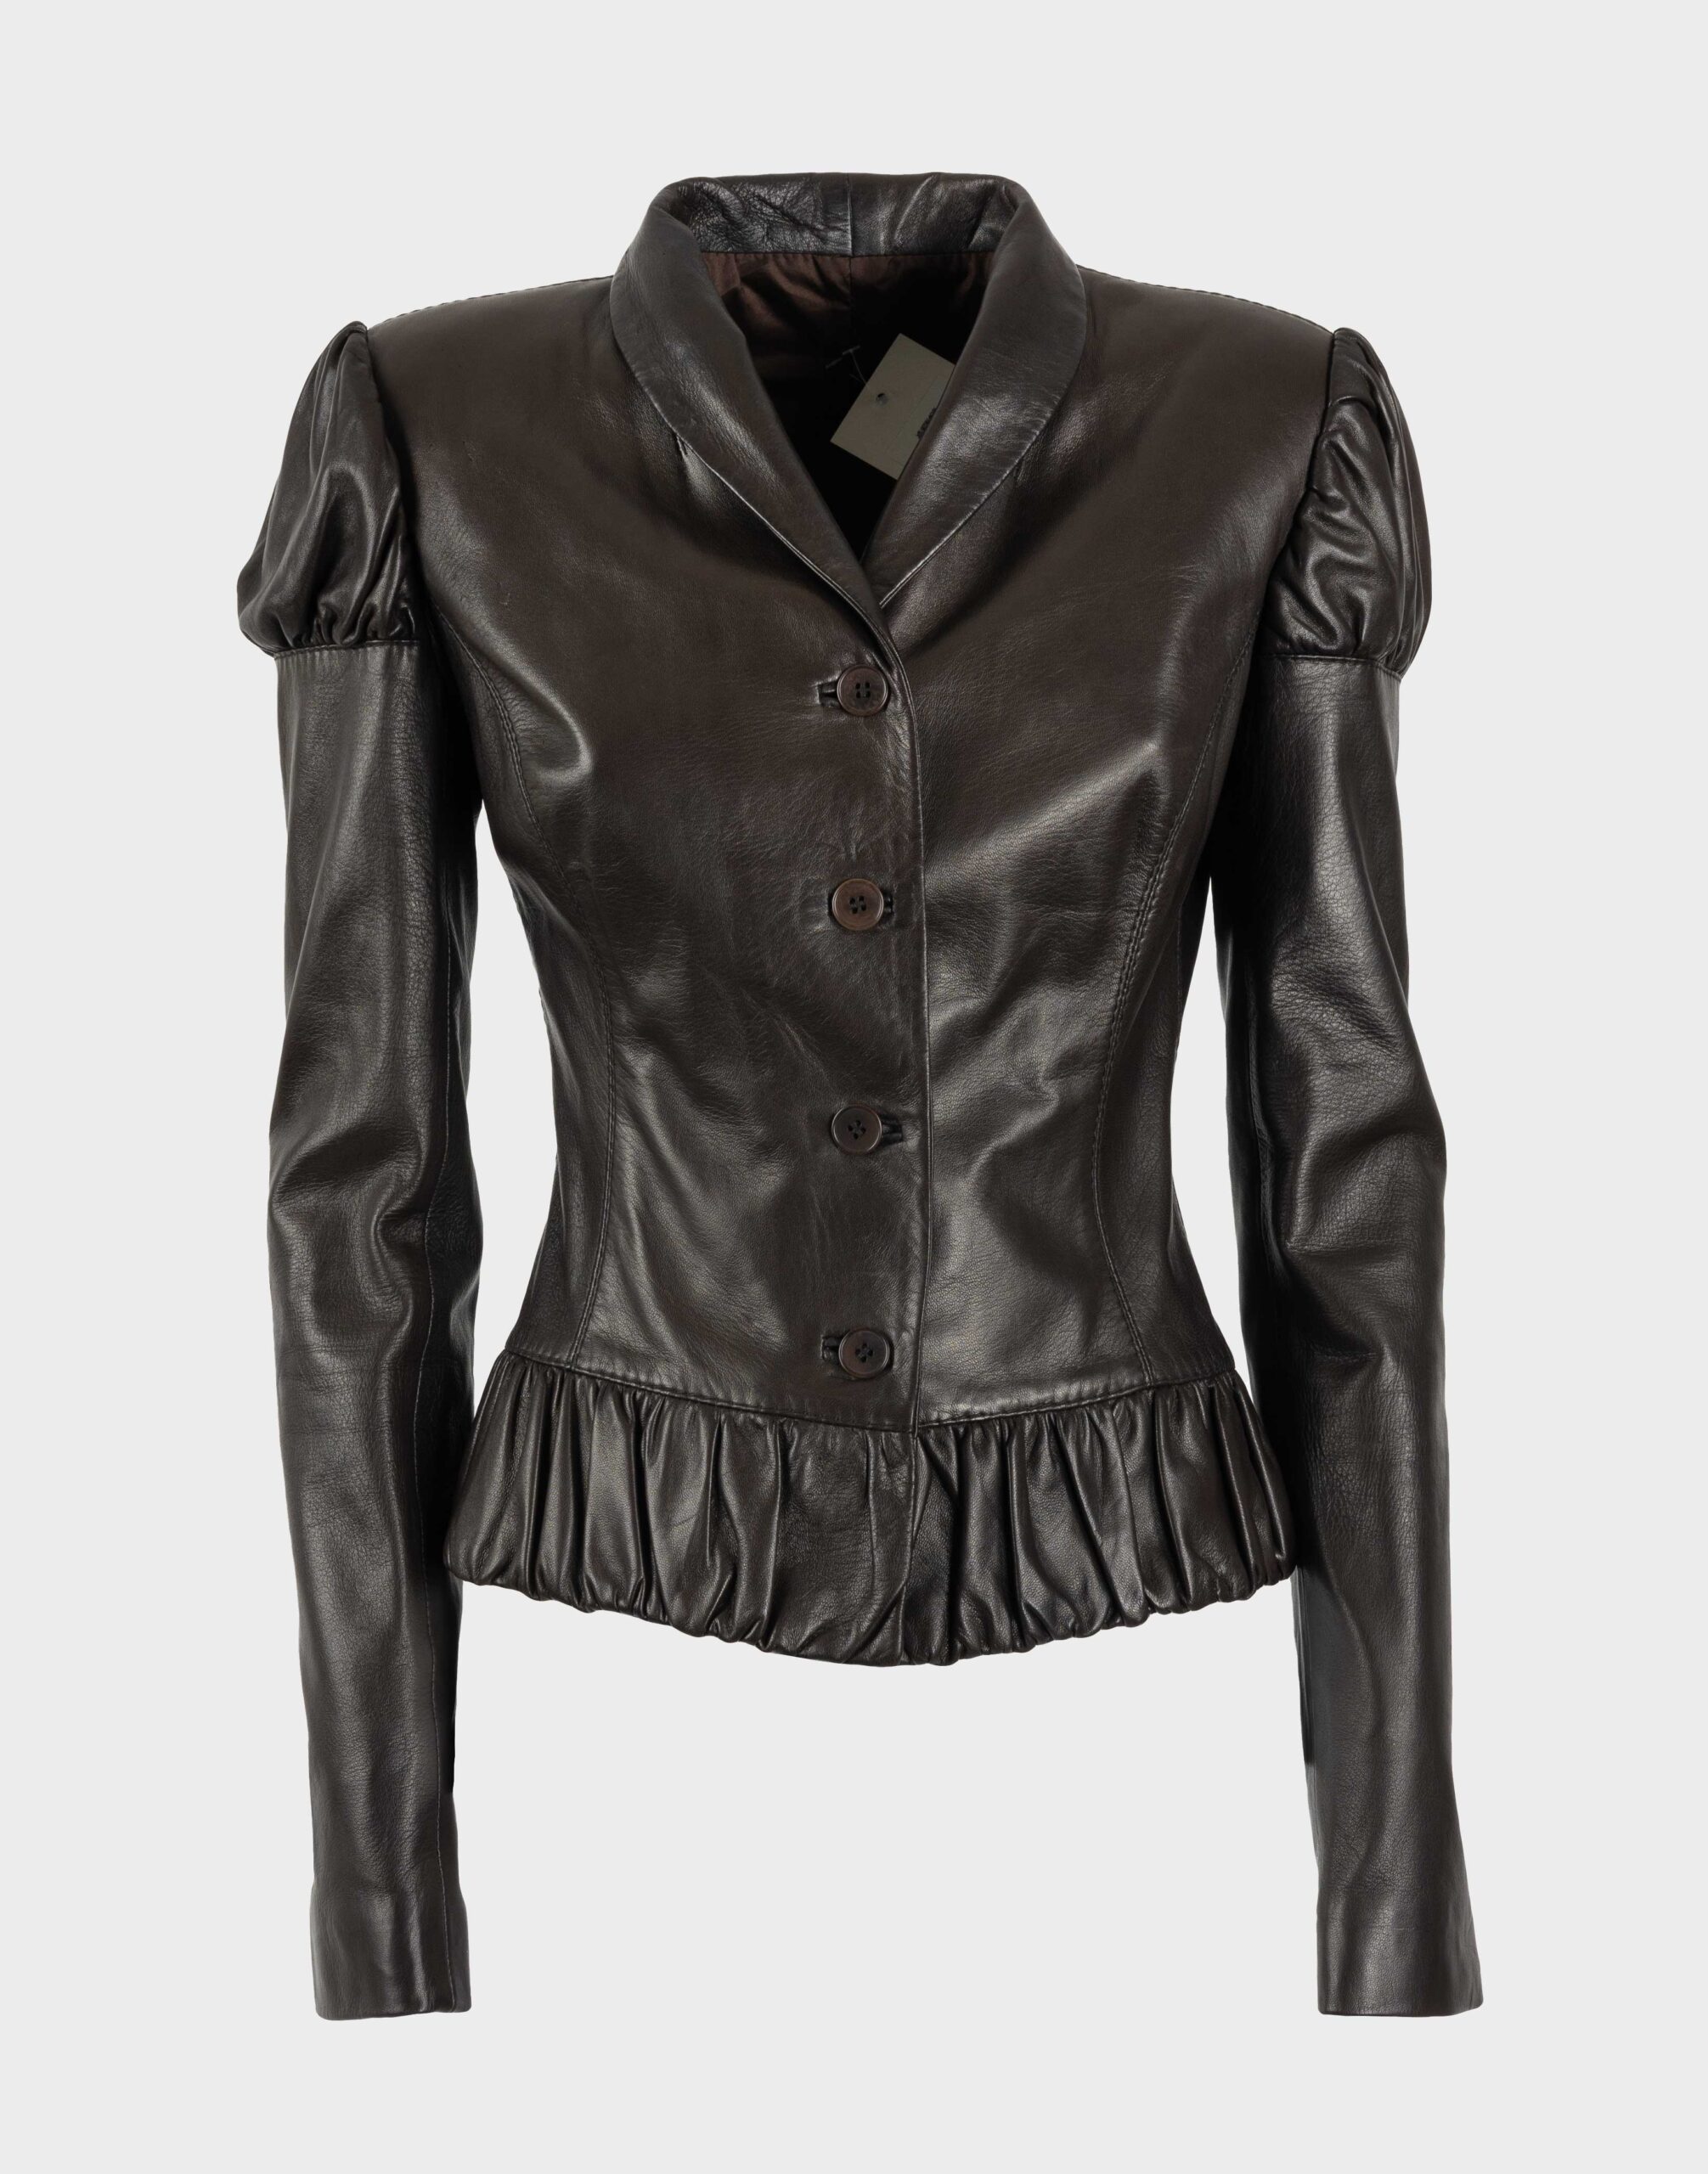 brown women's leather jacket with gathers at shoulders and bottom, fitted model